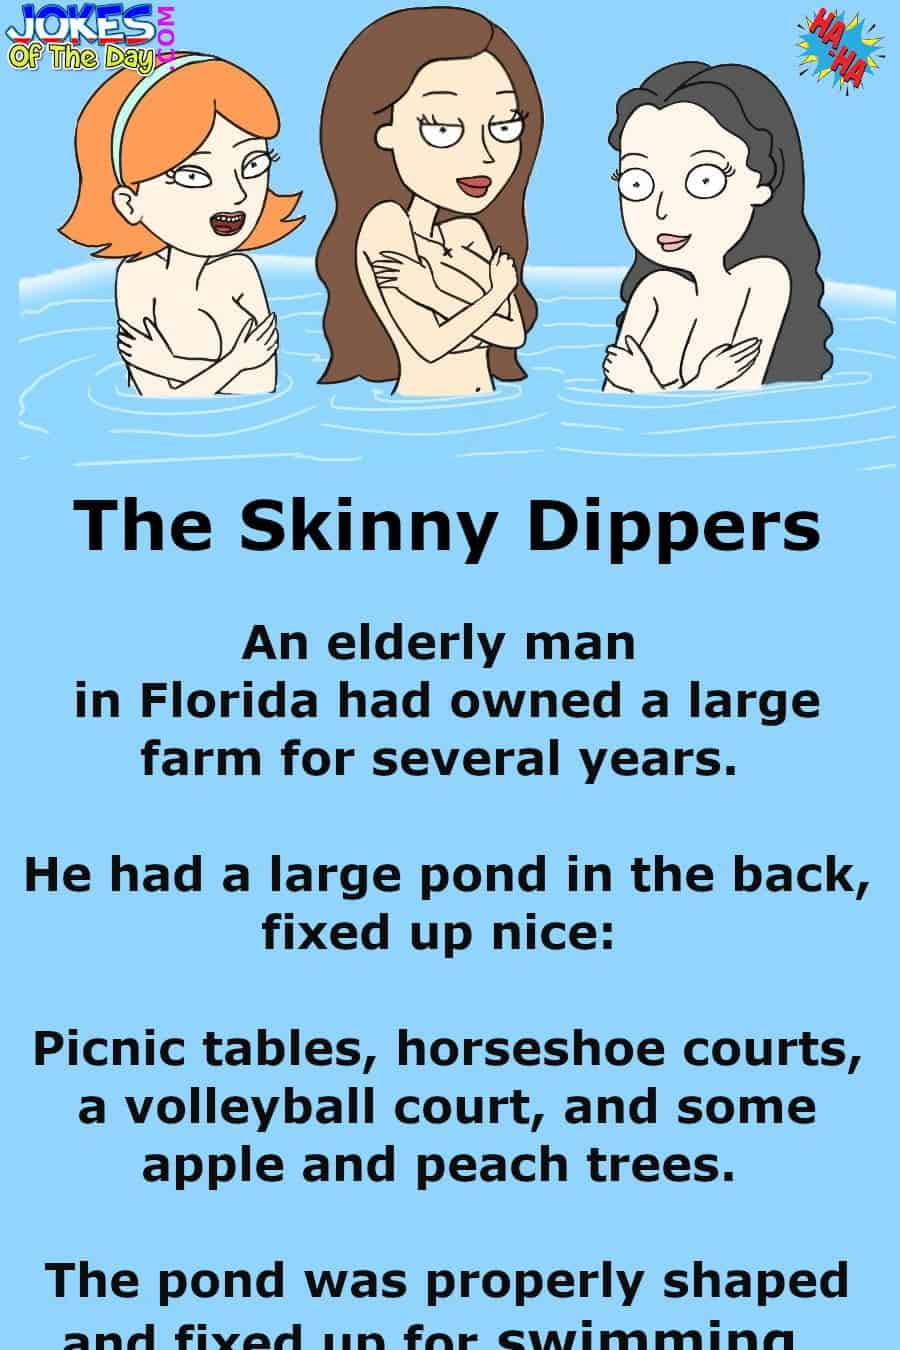 Funny Joke Of The Day - The skinny dipping girls and the old man  ‣ Jokes Of The Day 